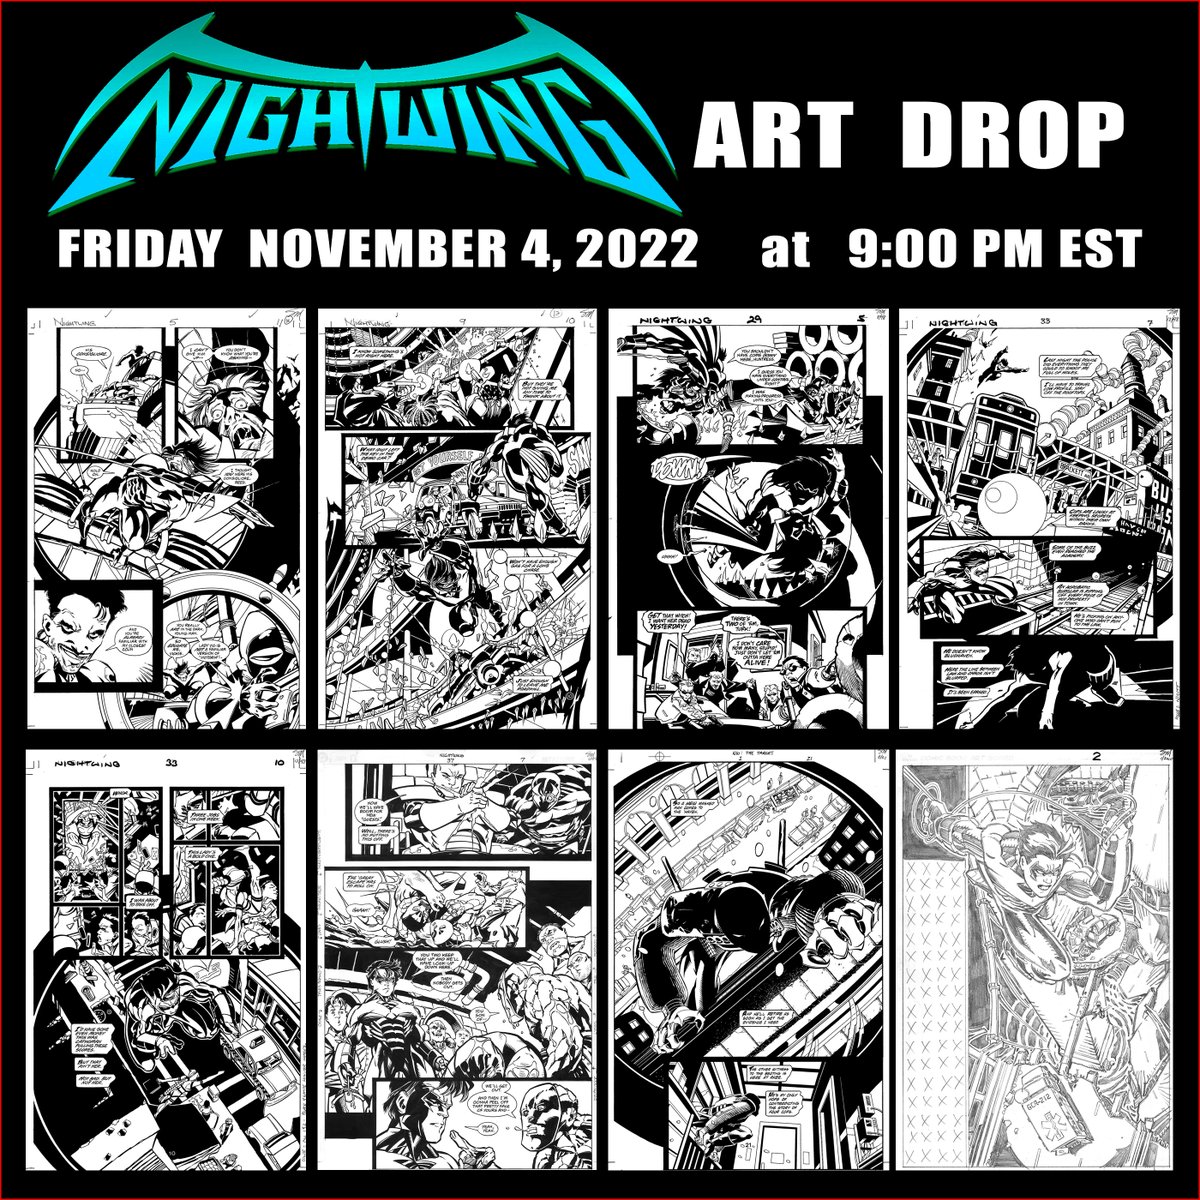 Reminder to art collectors: NIGHTWING ART DROP – Friday November 4 at 9 PM EST. Over 250 cool pages never before online. No early access – hope to see you there. scottmcdaniel.net/artsale2/inter…